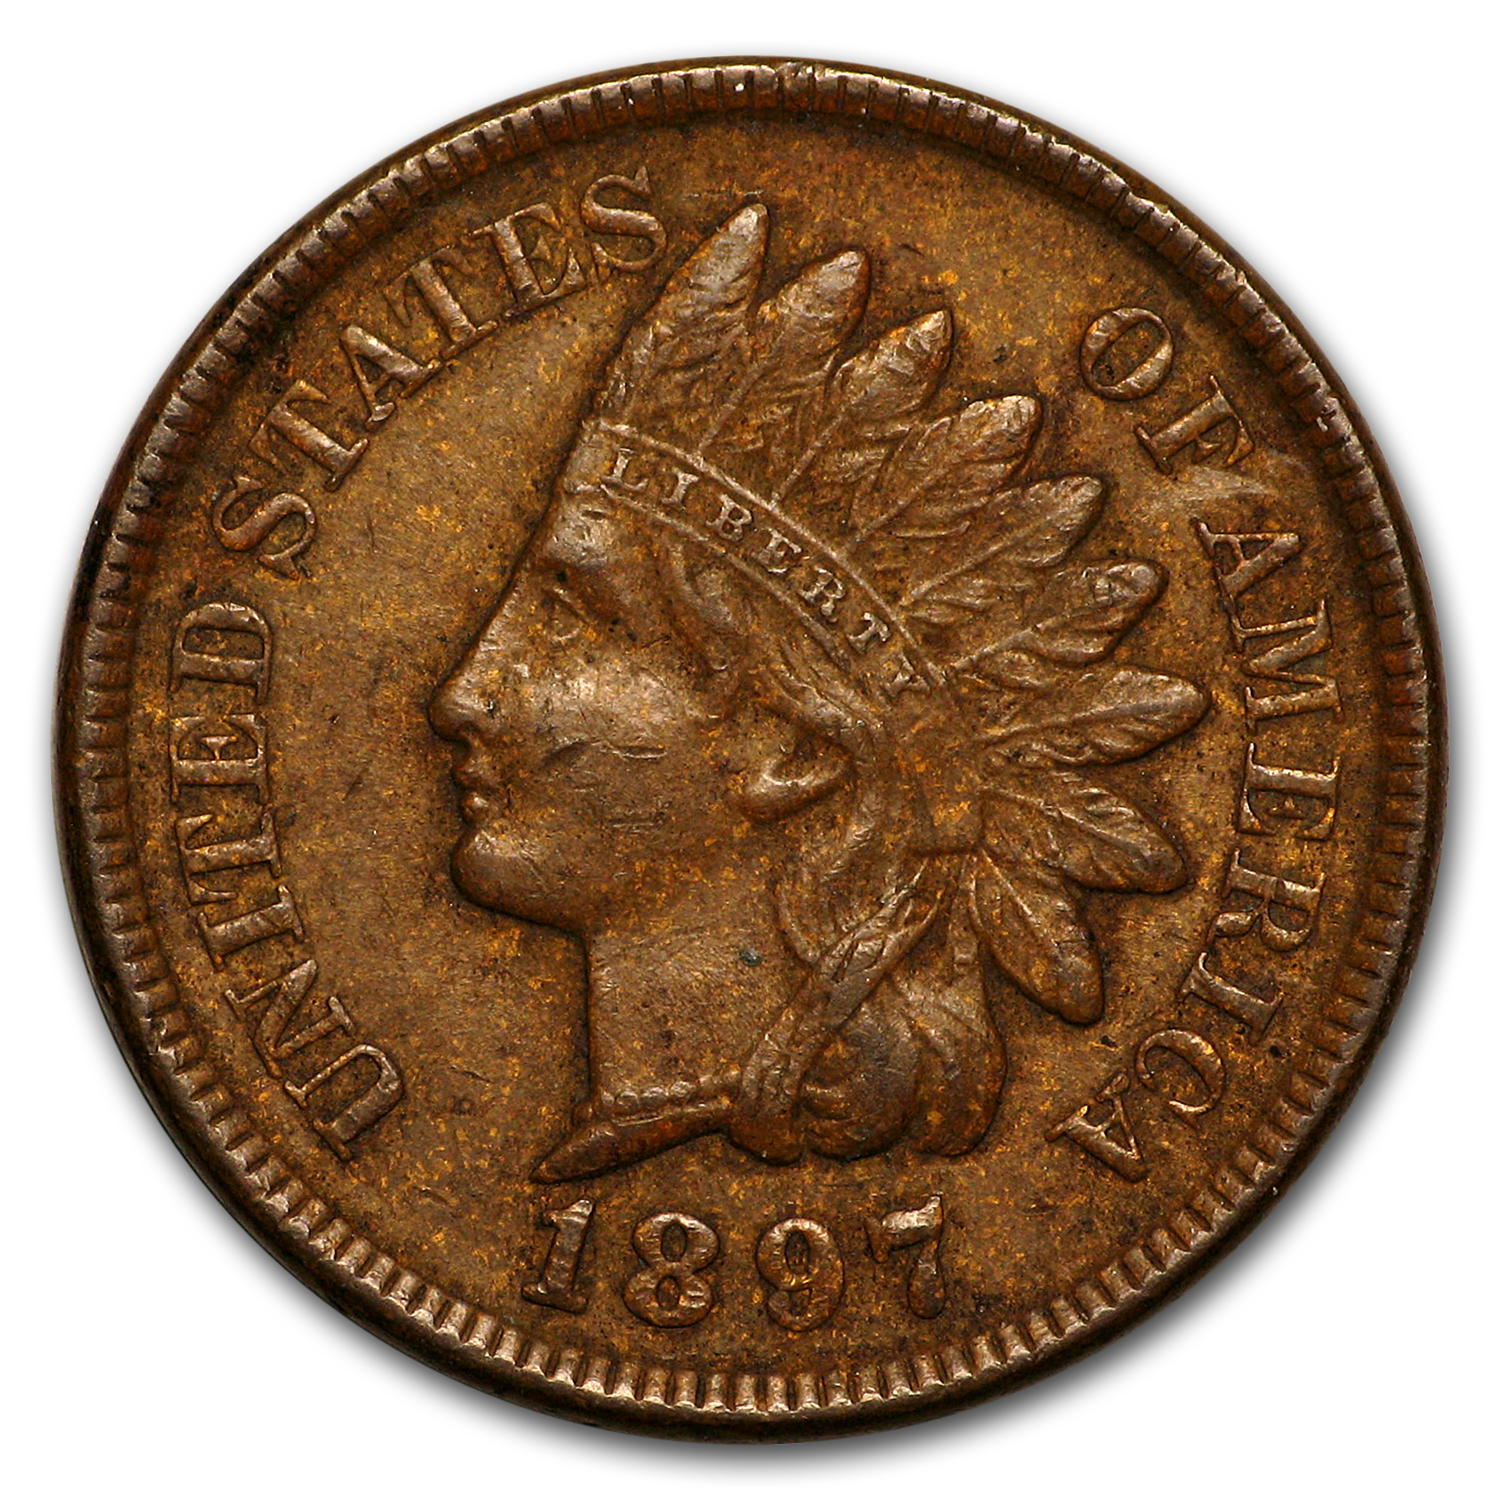 Buy 1897 Indian Head Cent XF